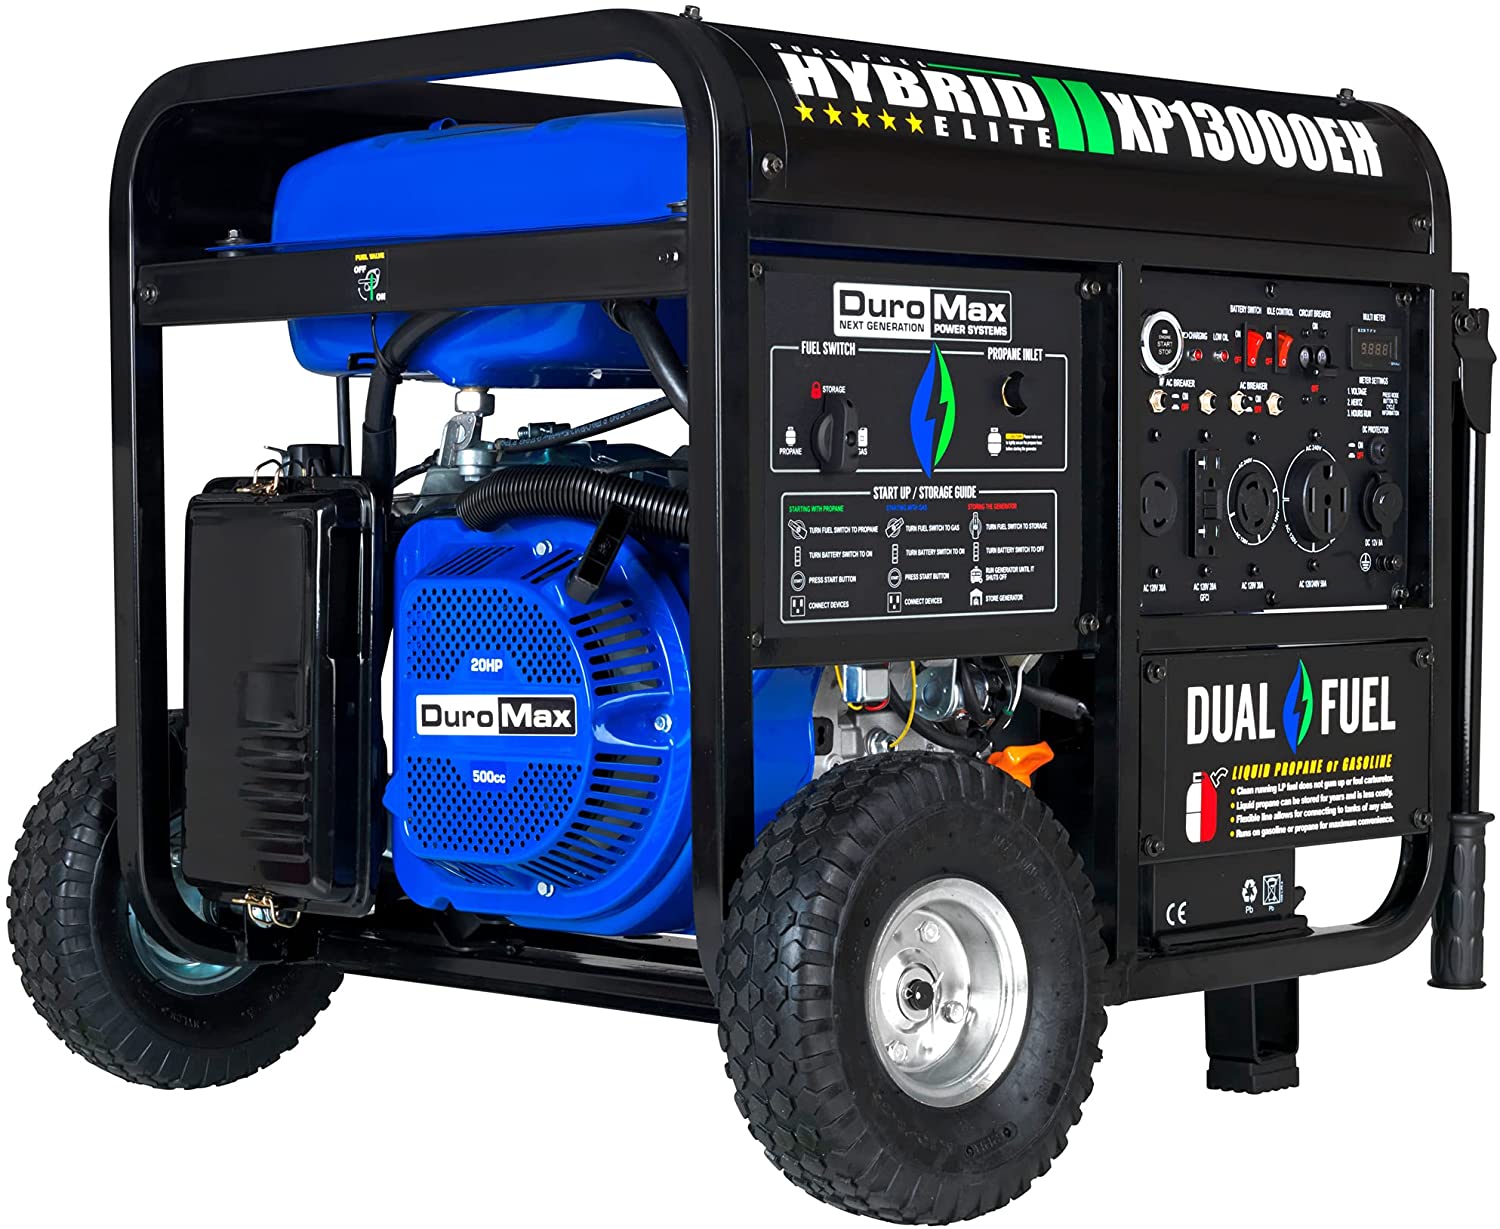 DuroMax XP13000EH 13,000W 240V Dual Fuel Gas or Propane Powered Electric Portable Generator $959.20 + Free Shipping via Amazon